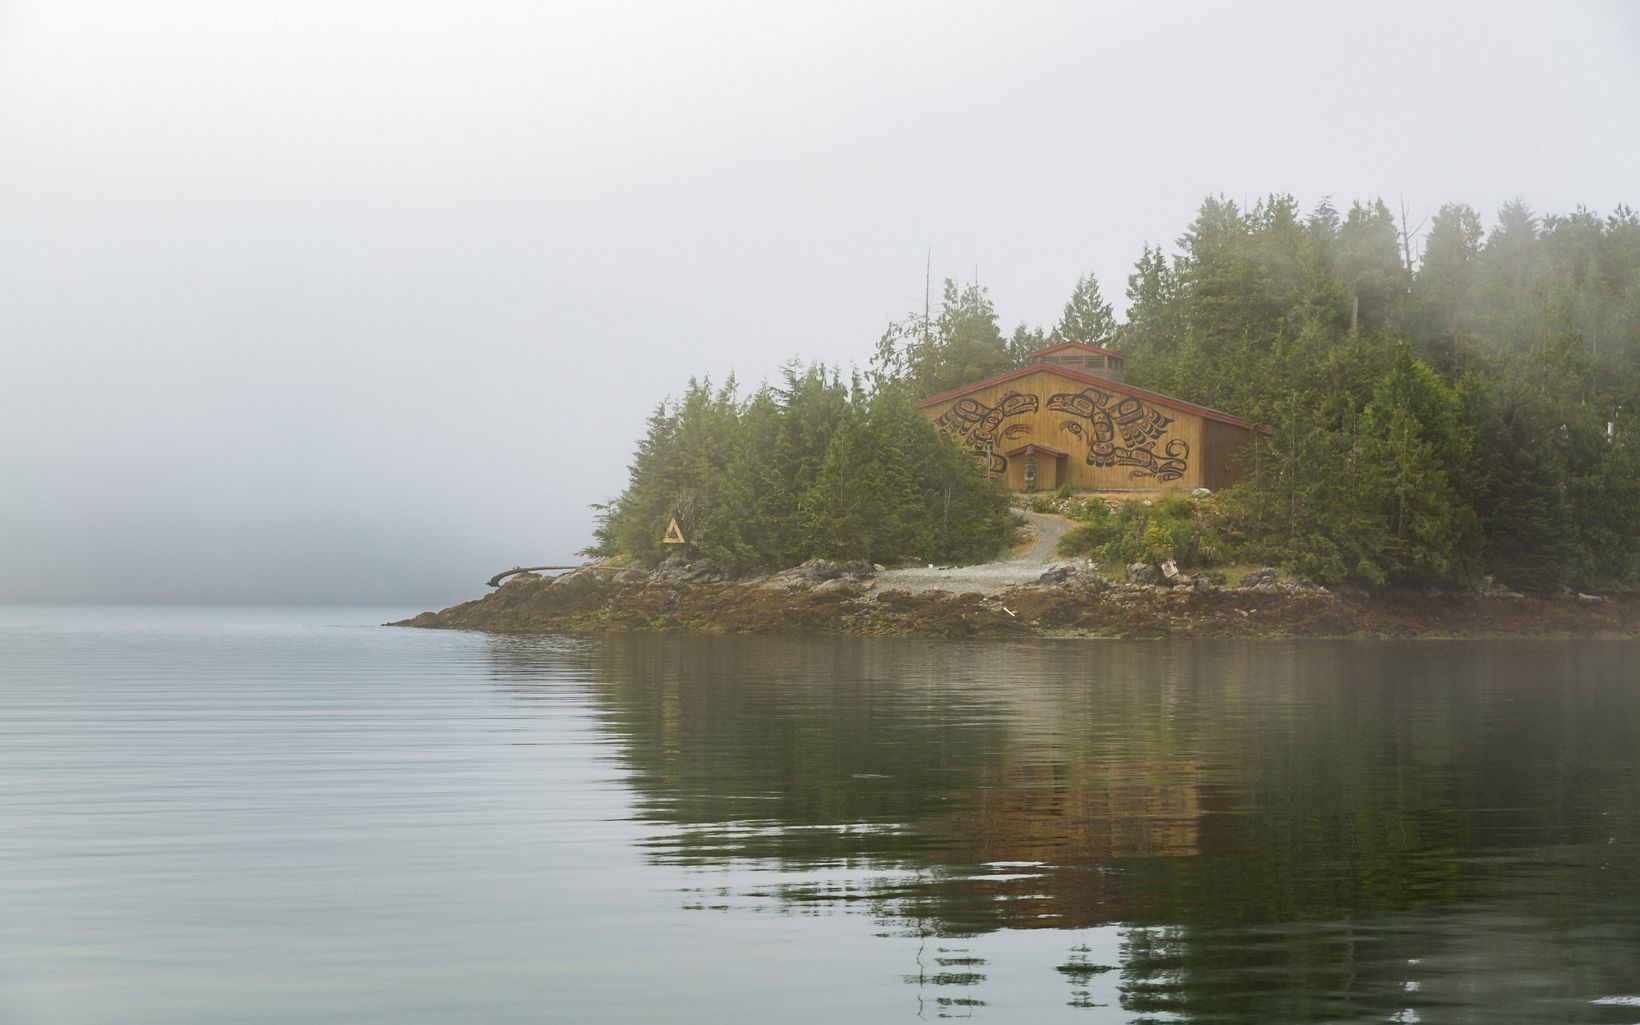 View of a small wooden building with Indigenous drawings on the front at the waterfront edge of a piece of land on a foggy day.